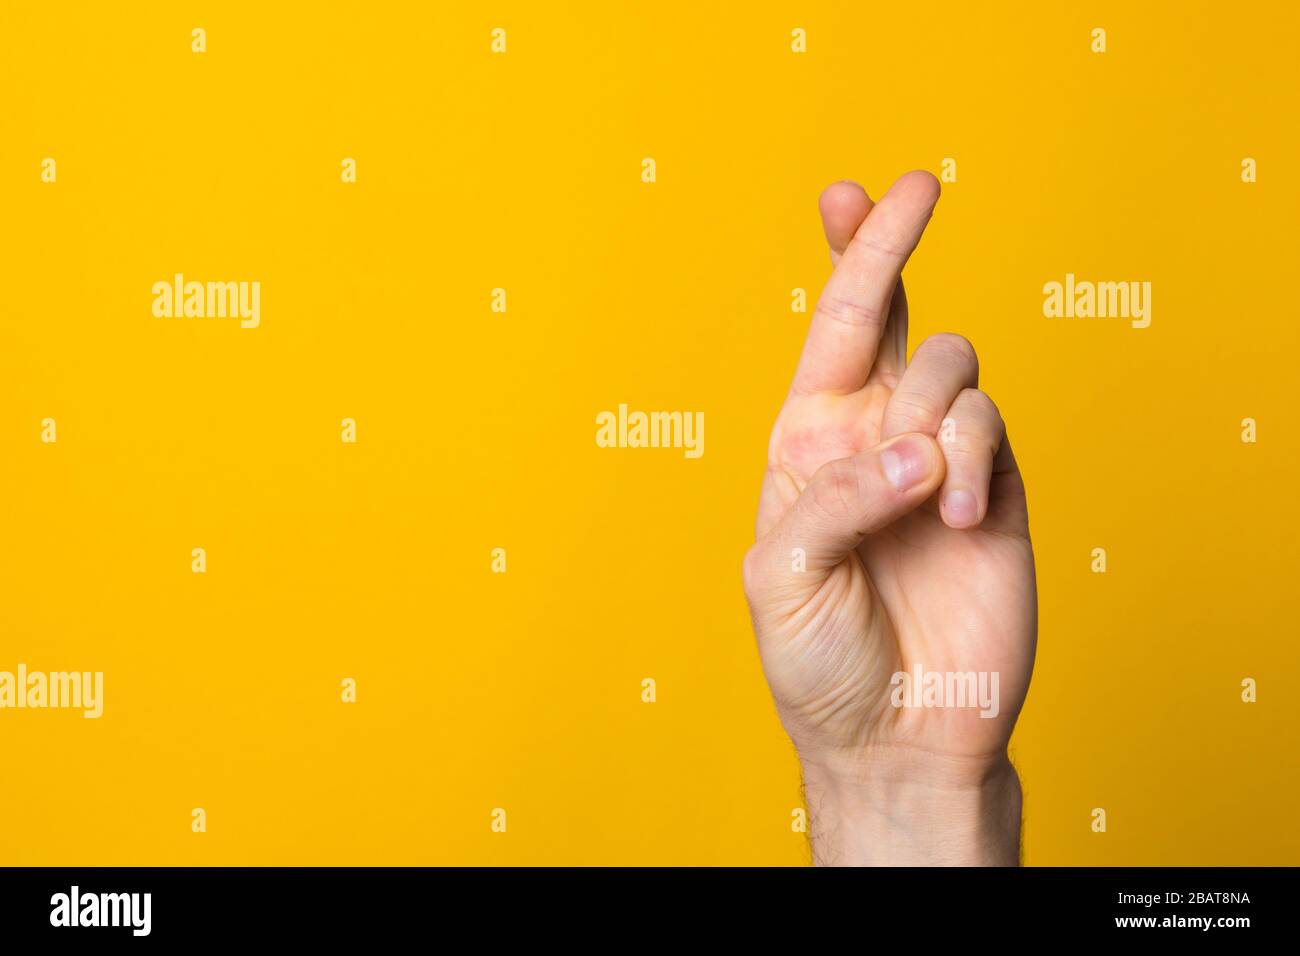 fingers crossed hope sign. close up man hand symbolising faith against yellow background Stock Photo